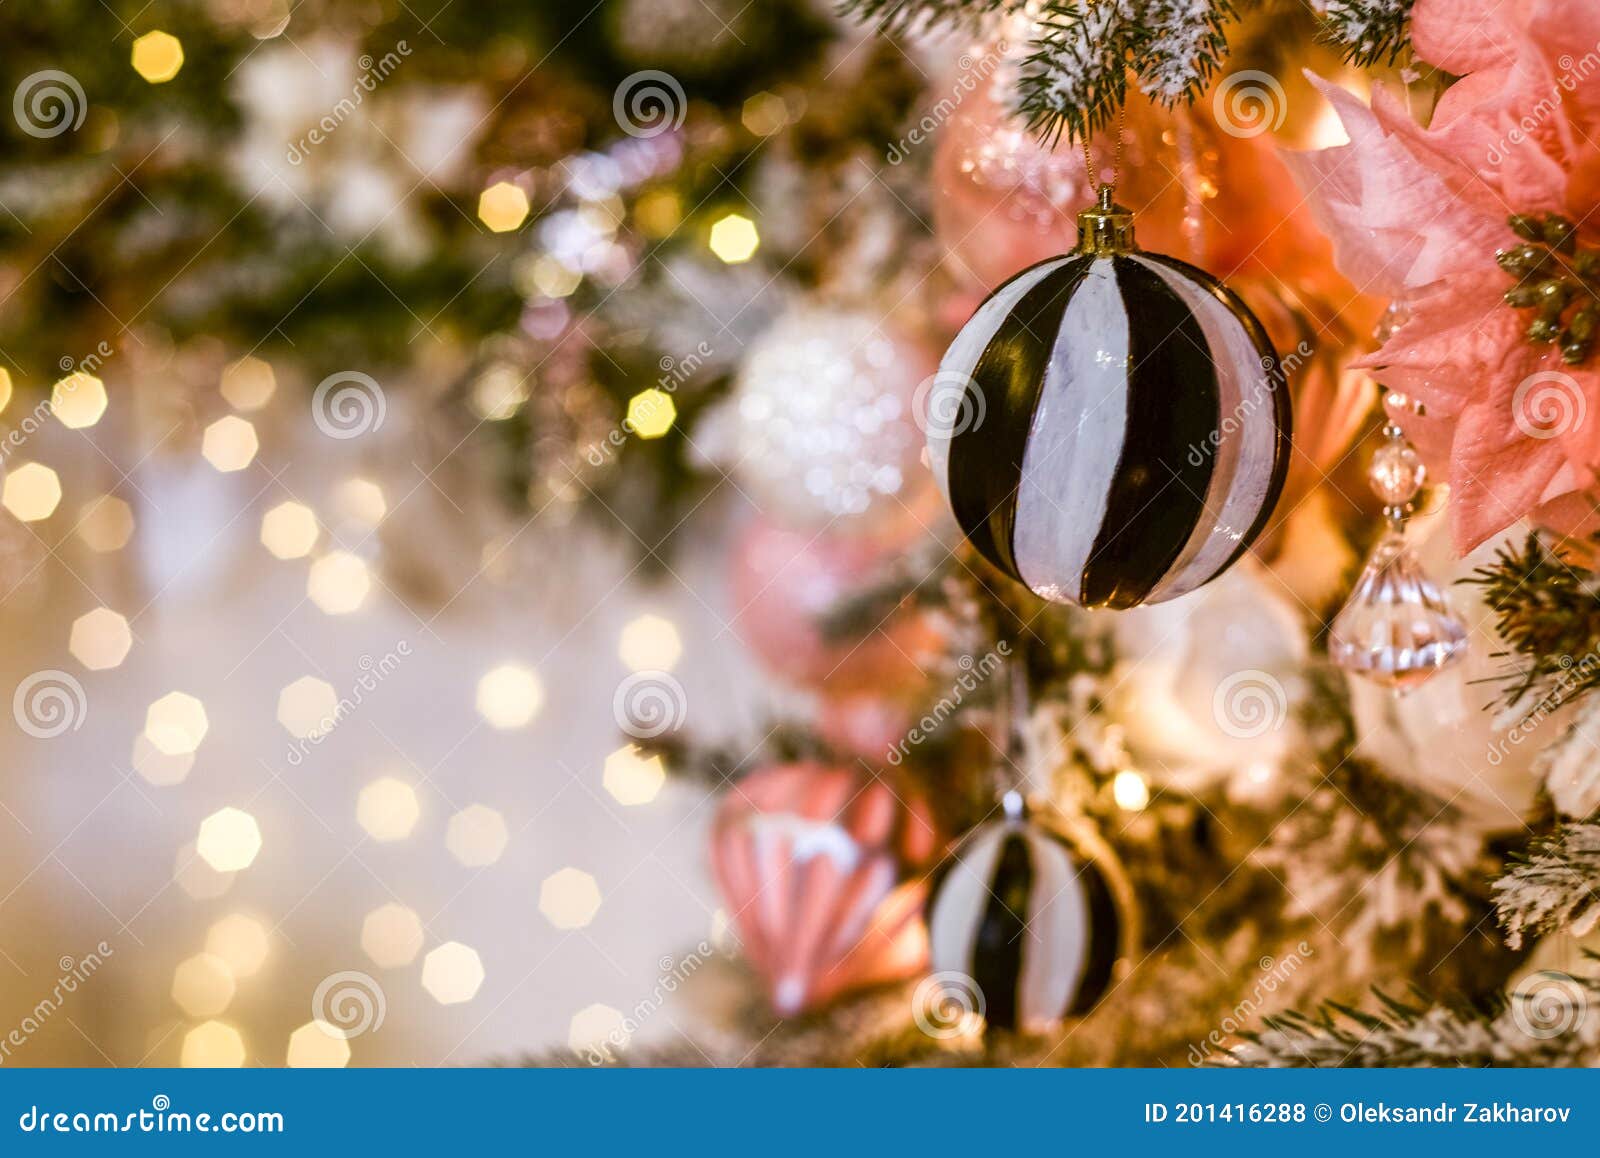 Festive Christmas Wallpaper with Christmas Ball Tree and Holiday  Decoration. Bright Greeting Card Christmas Bokeh Background and D Stock  Photo - Image of celebration, holiday: 201416288